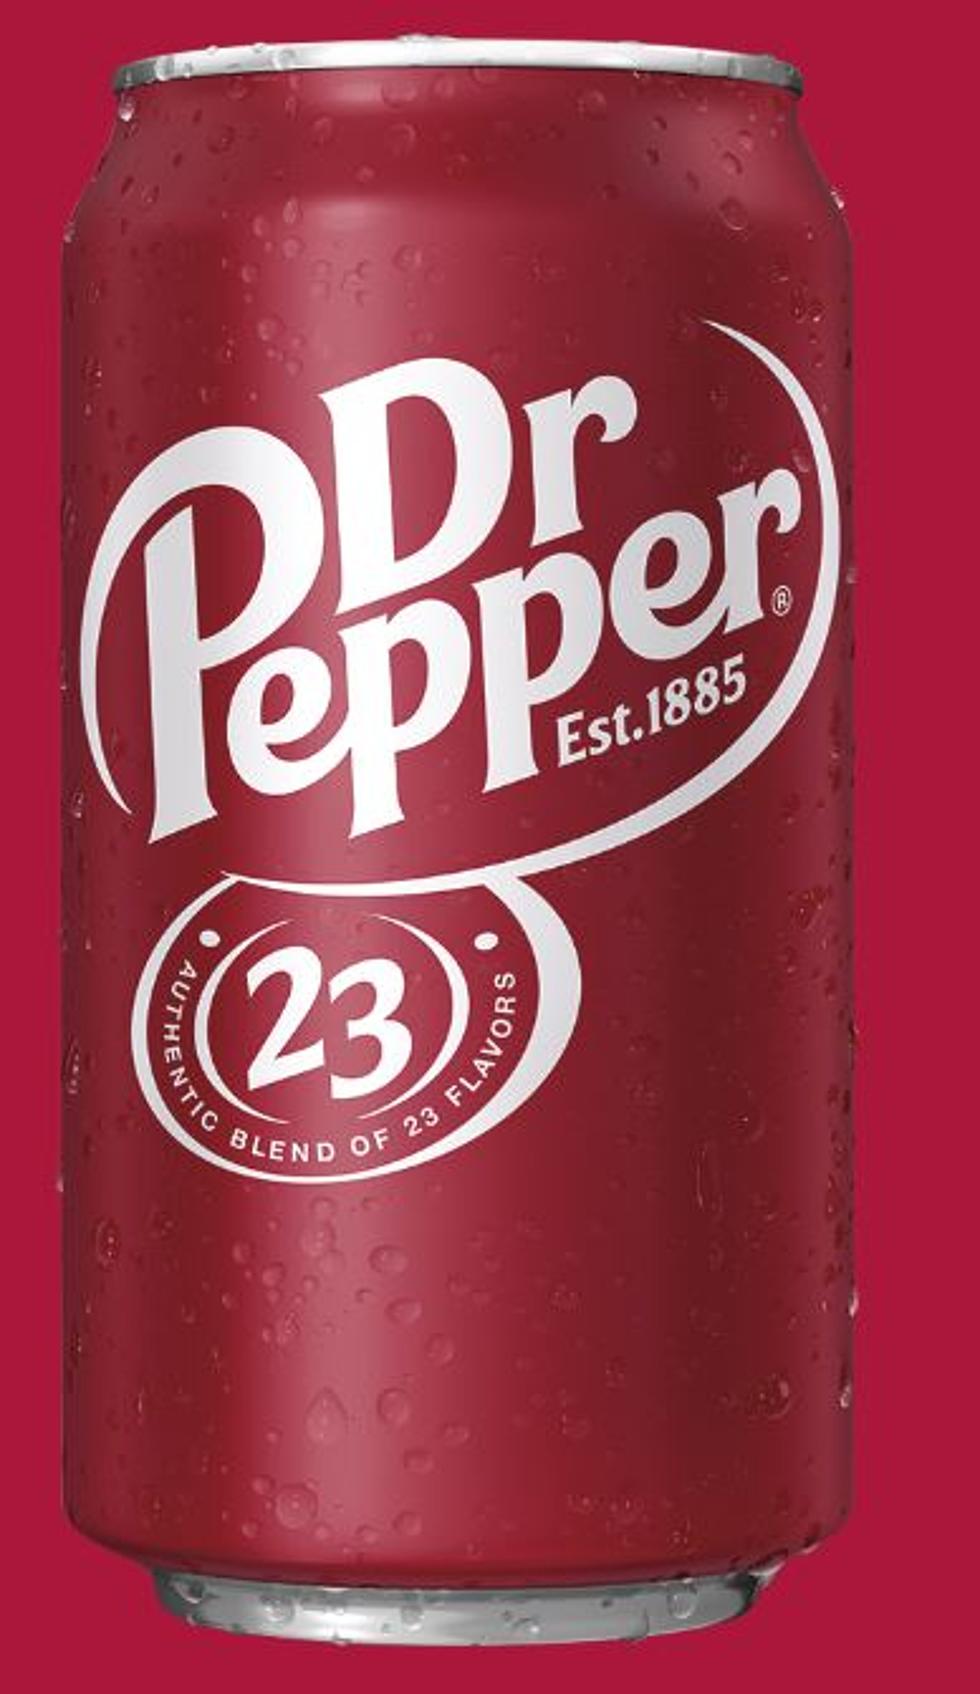 Have You Tried This New Limited Edition Dr. Pepper Item?